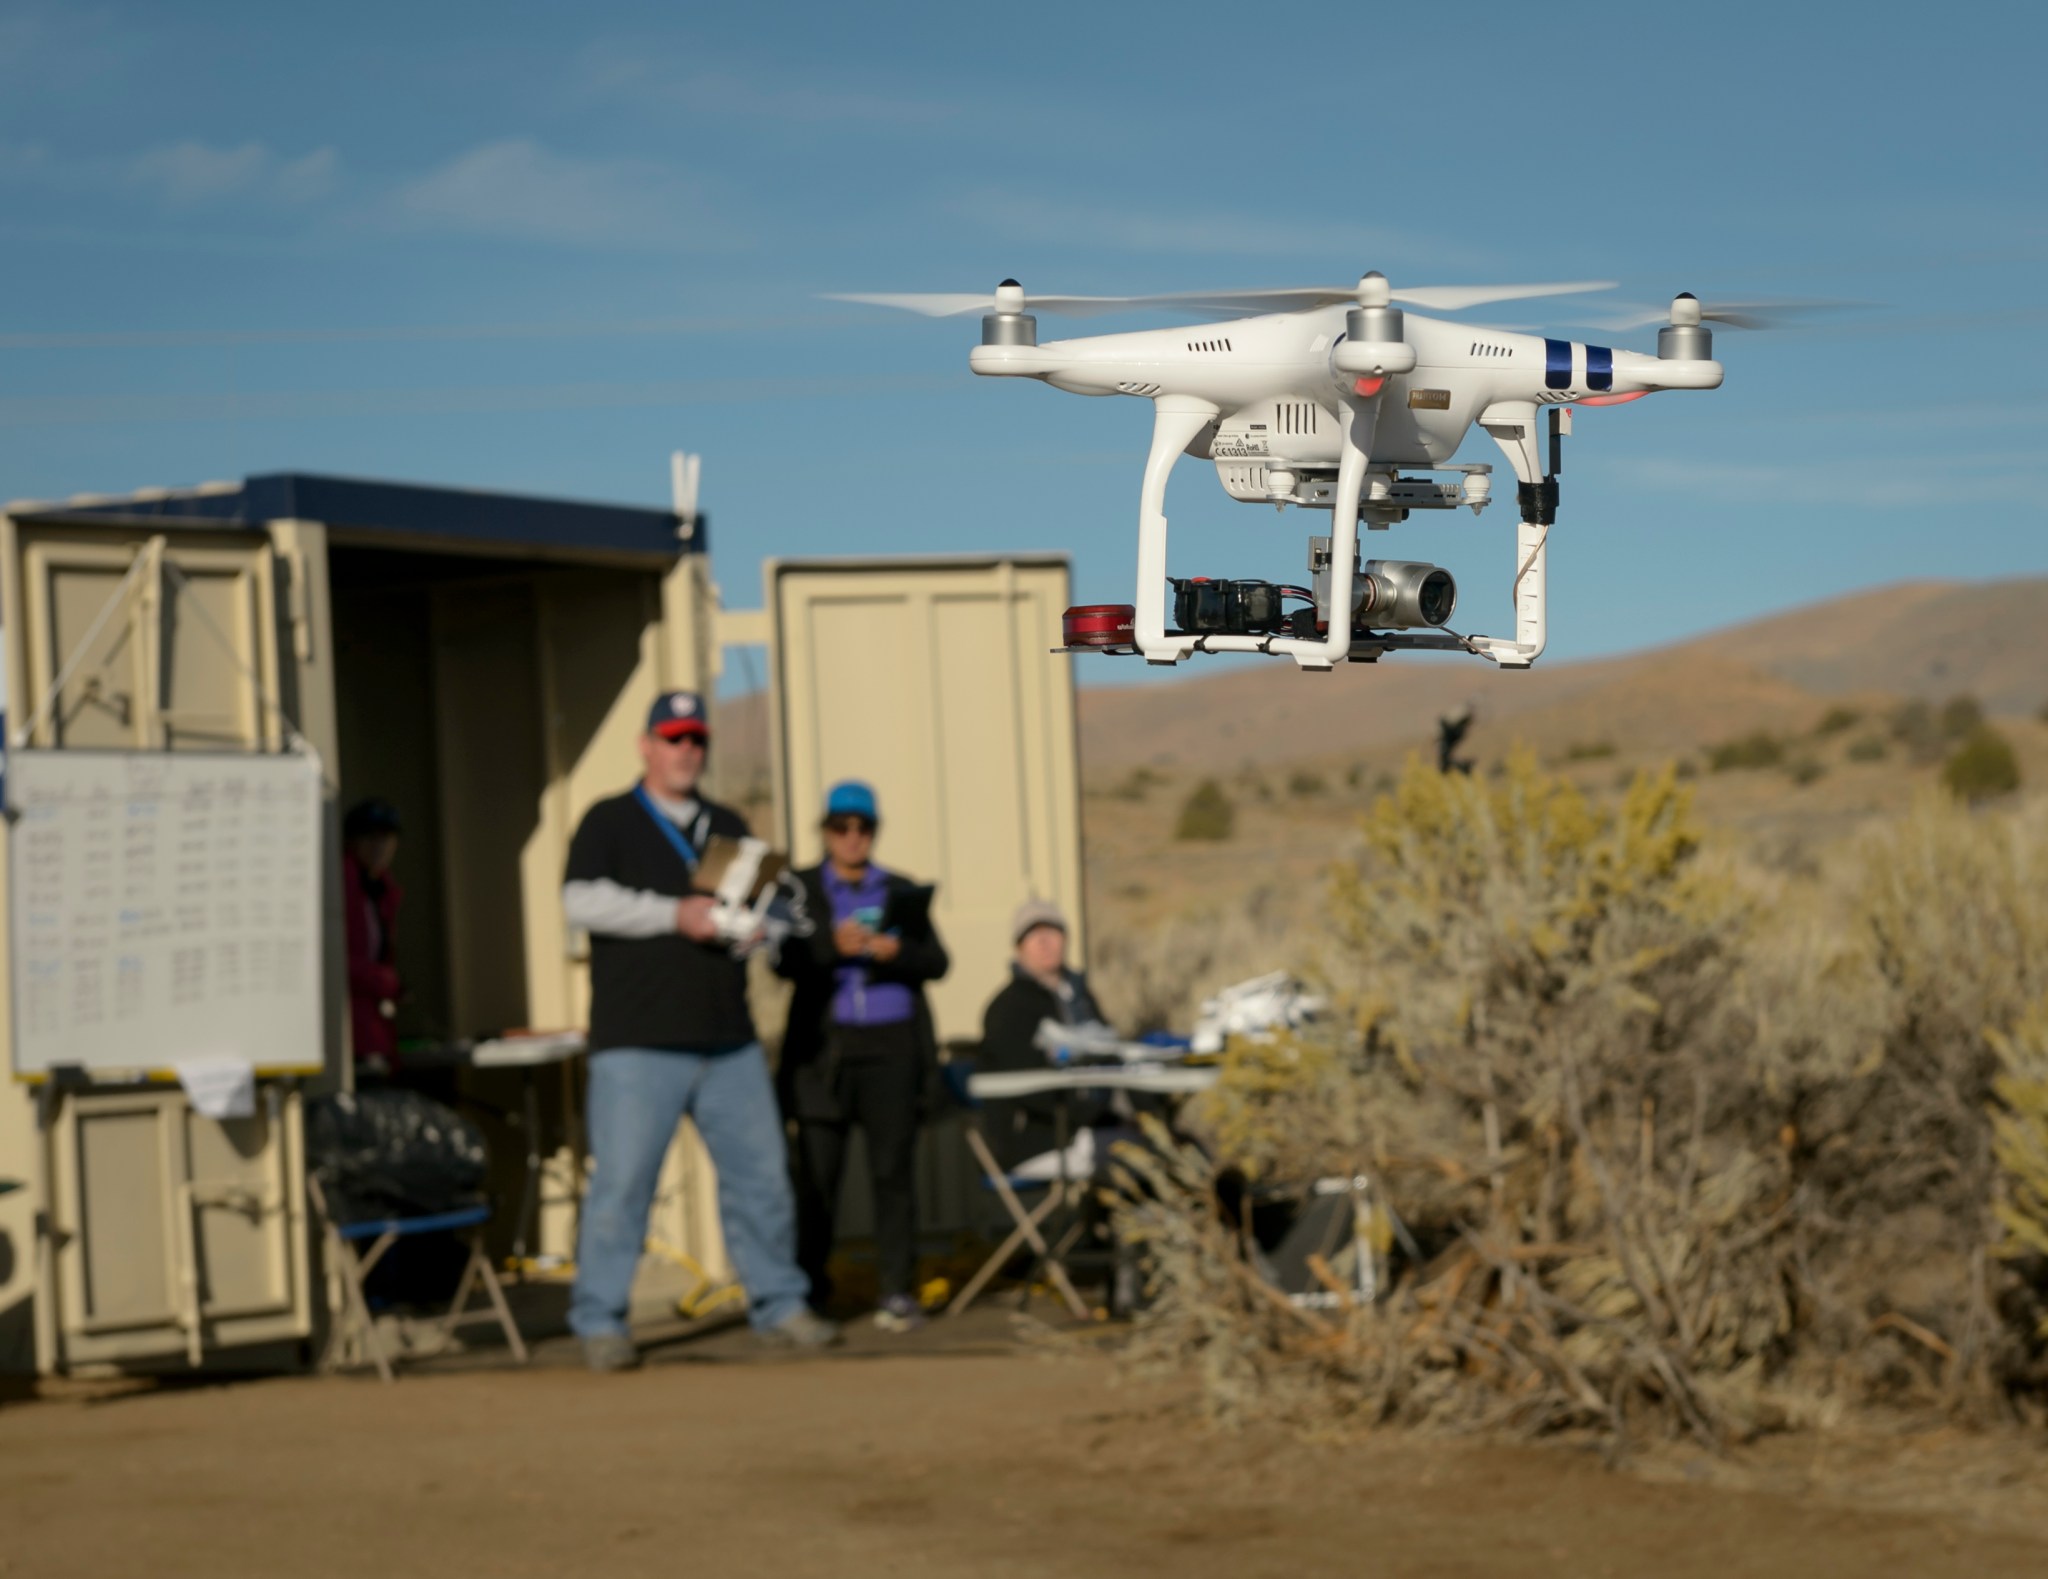 The Phantom 3 multi-copter being flown at the TCL2 Demonstration at Reno-Stead Airport, October 2016